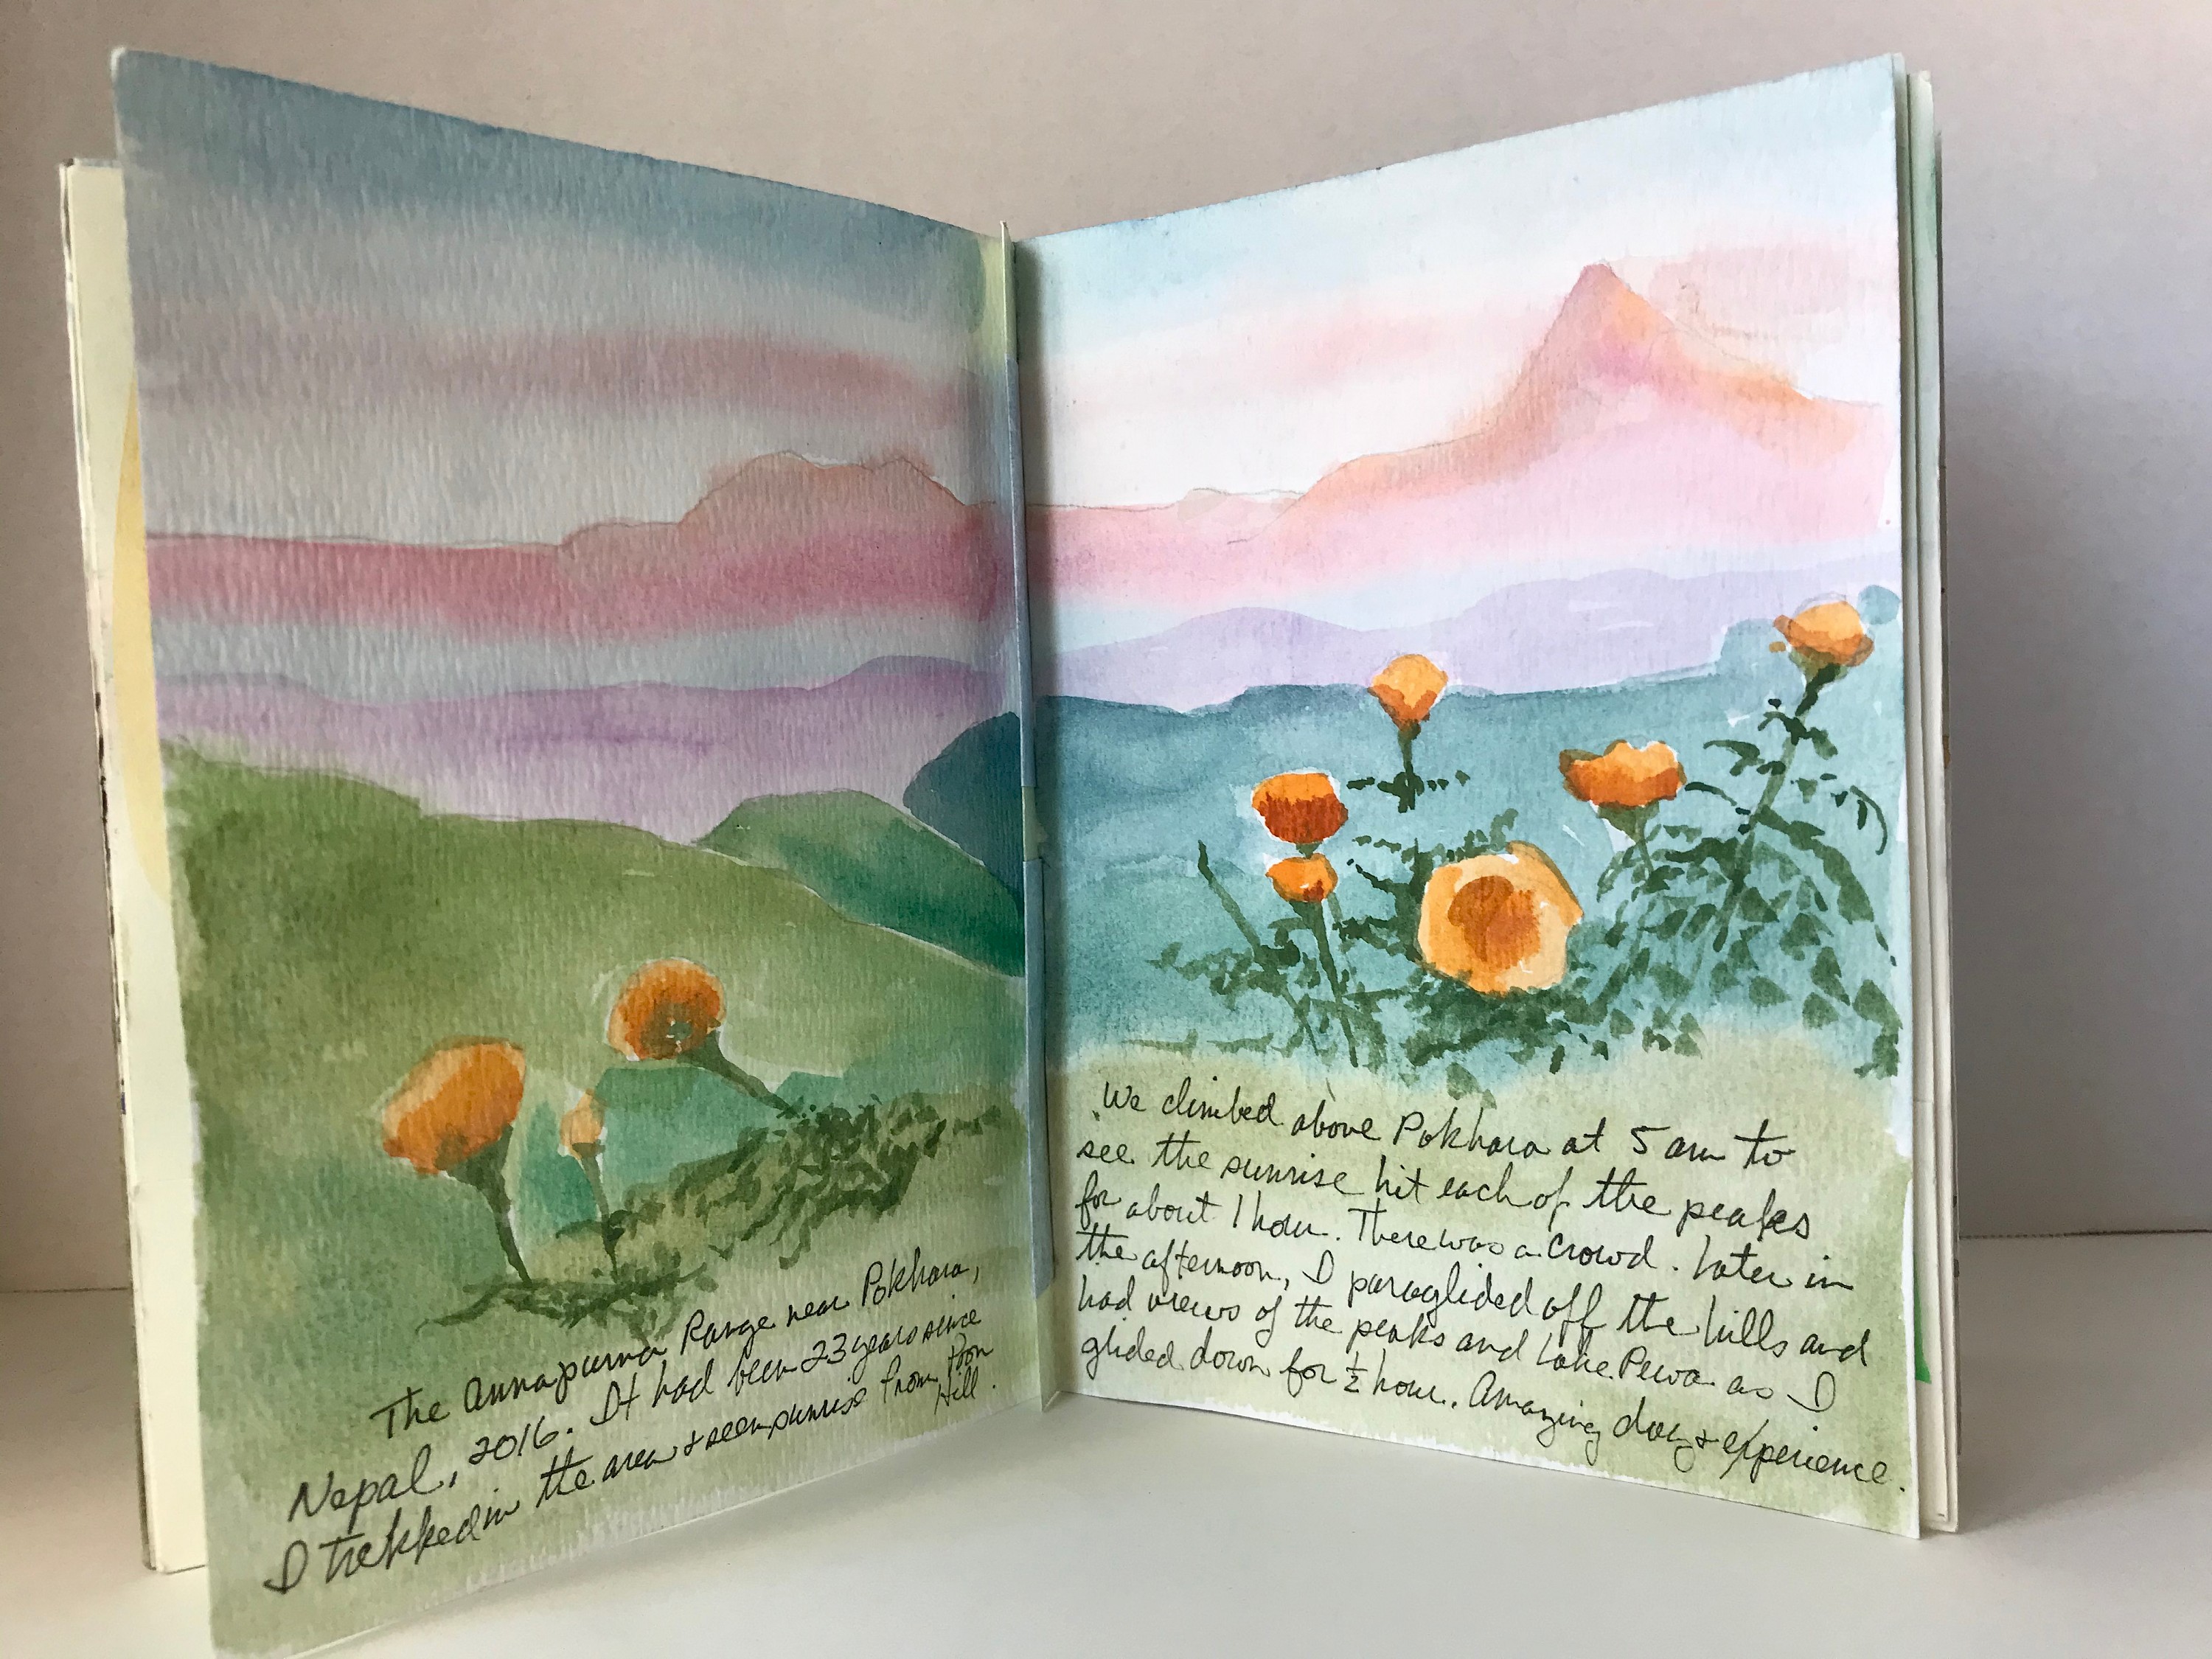 Keeping a Nature Journal with Sherrie York - Farnsworth Art Museum